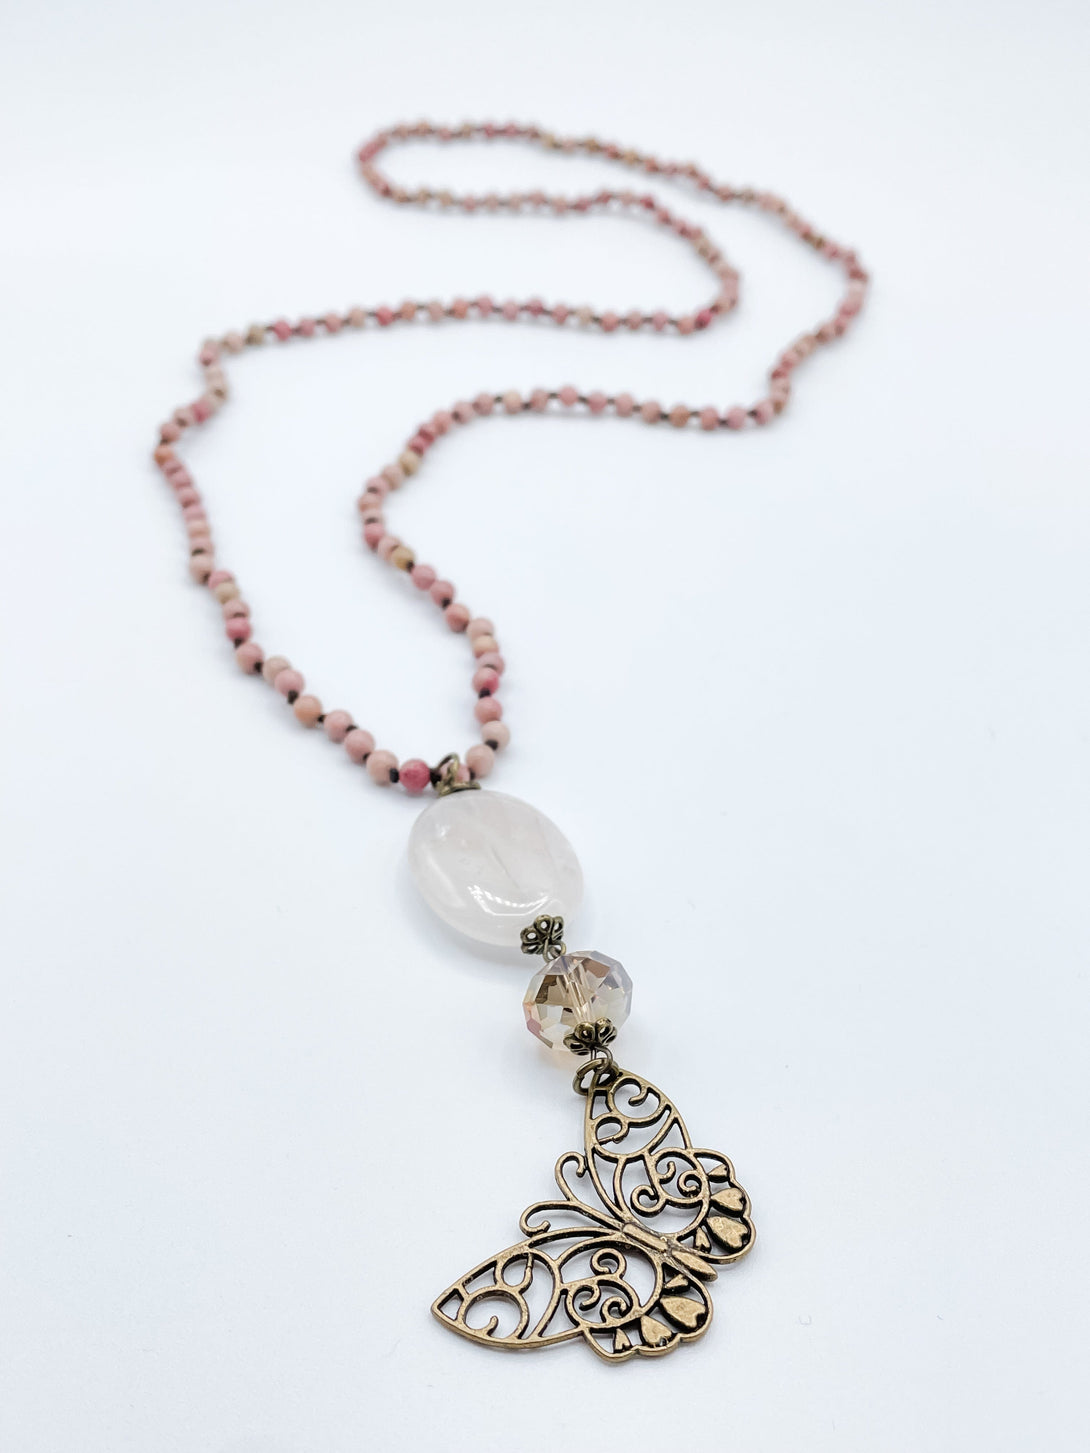 Long Beaded Necklace with Large Oval Stone, Faceted Crystal, and Butterfly Pendant